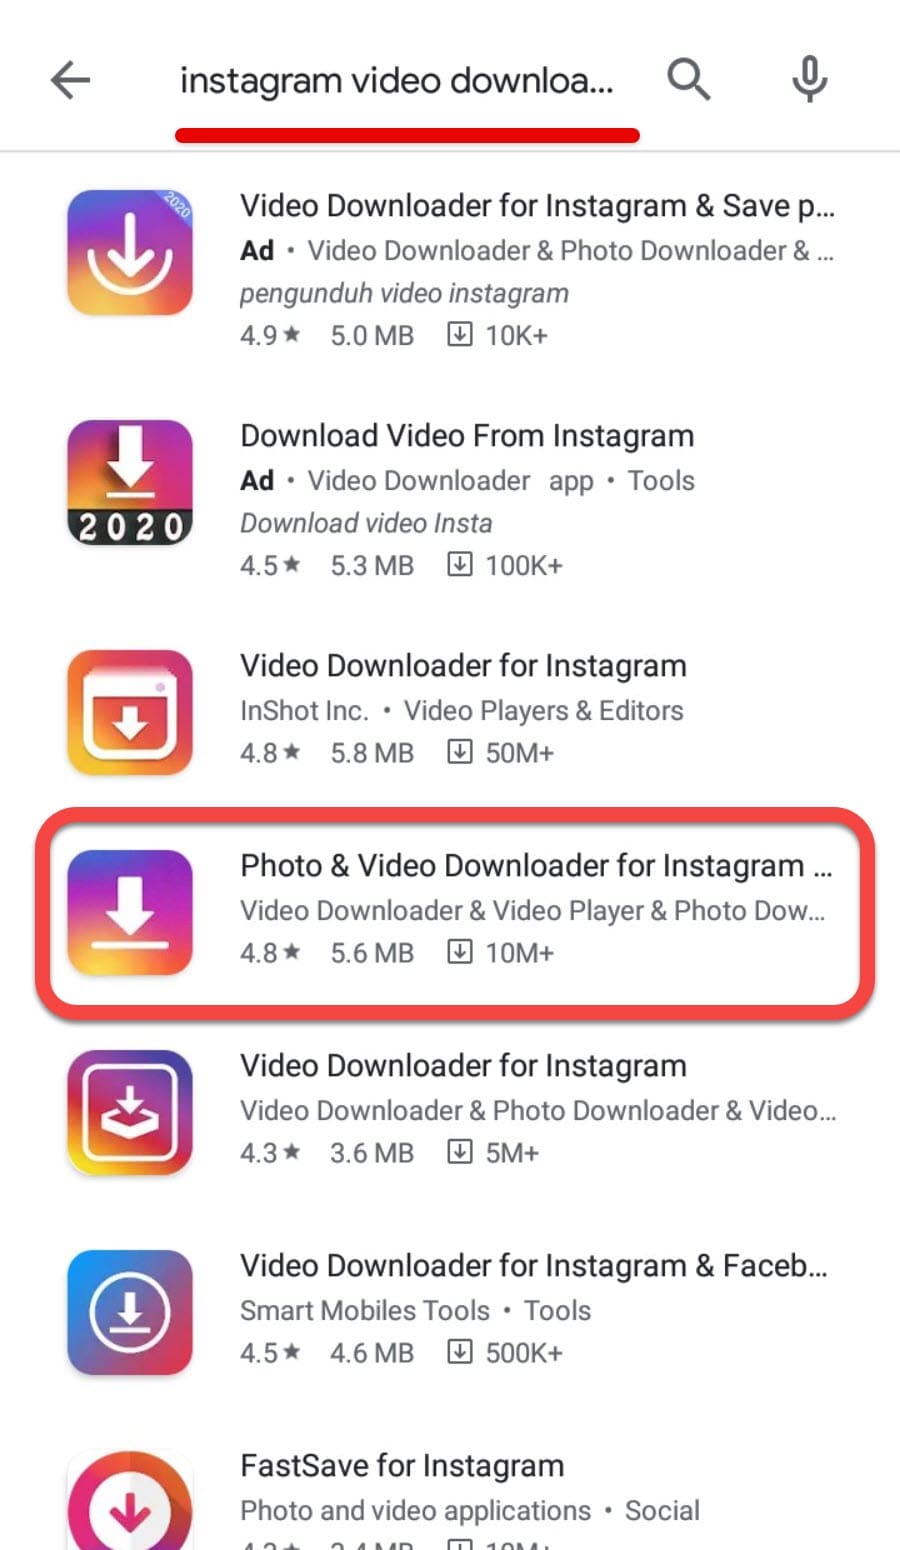 Download Instagram Videos on Android